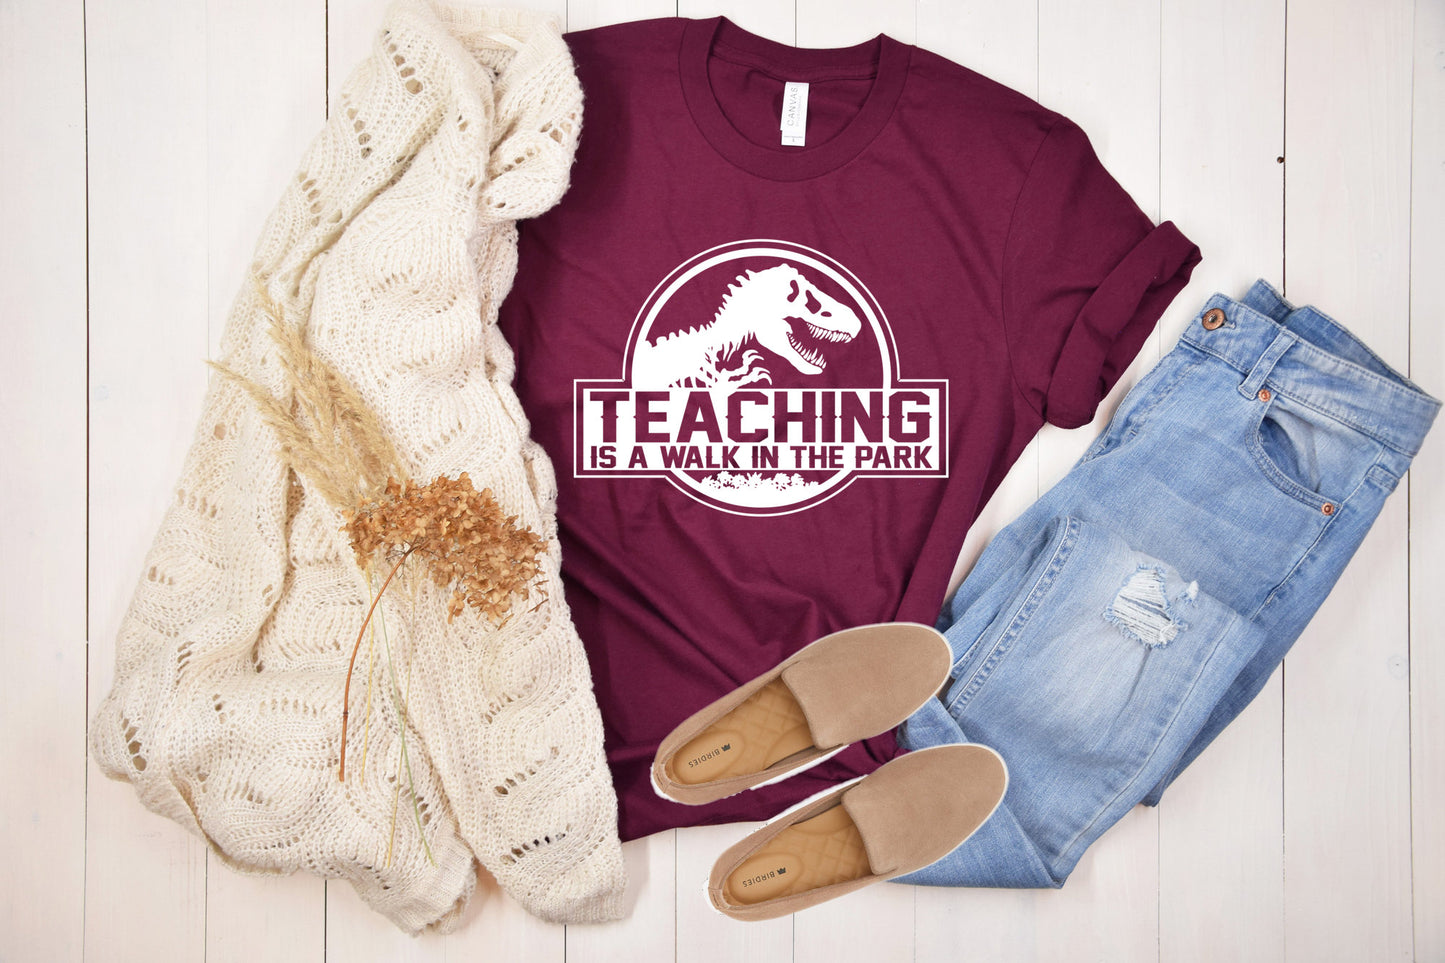 Teaching Is A Walk In the Park Shirt, Jurassic Style Shirt, Funny Teacher Shirt, Teachers Shirt, Teacher Outfit, Field Trip for Teachers